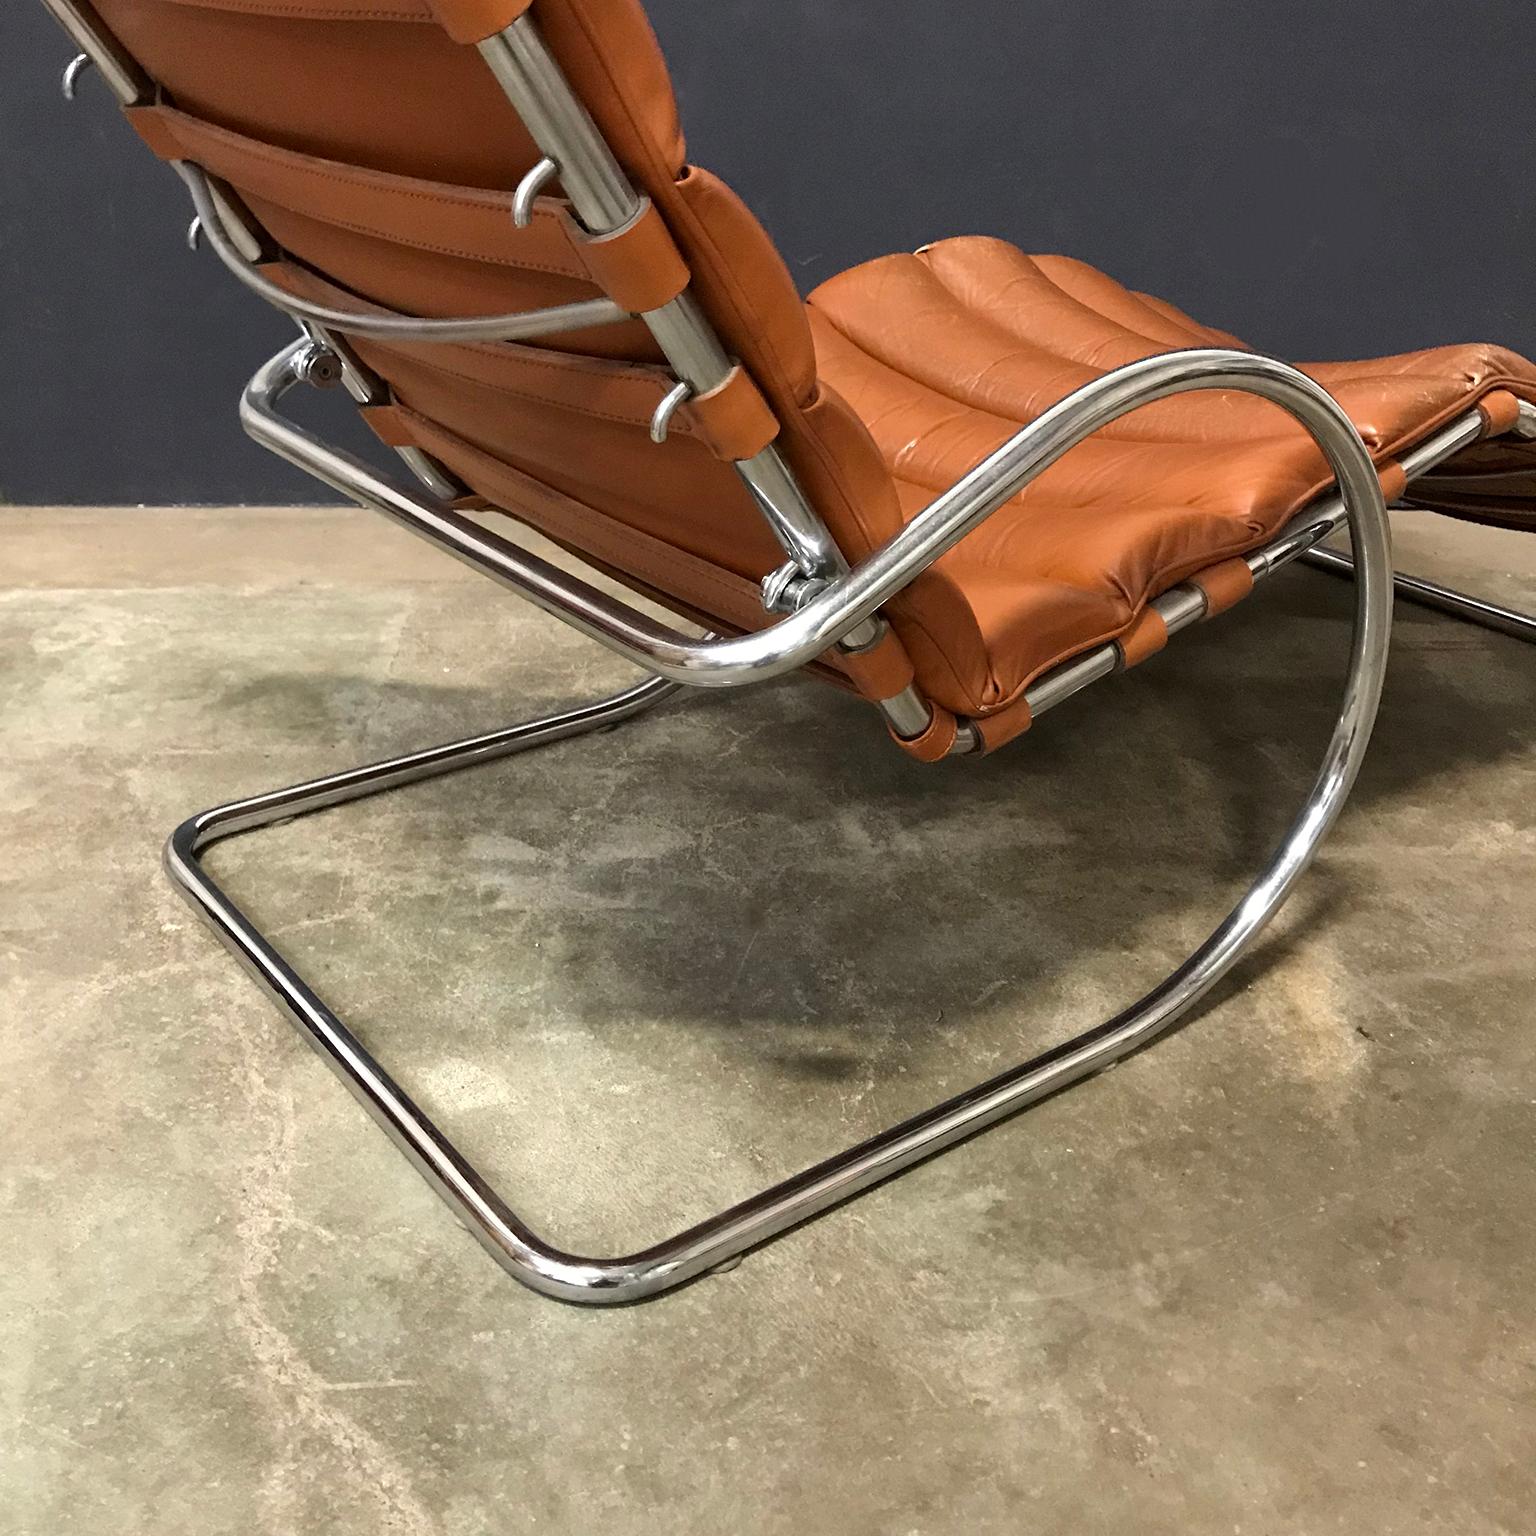 1965, Ludwig Mies van der Rohe, Rare Early Production Adjustable Chaise Longue 4